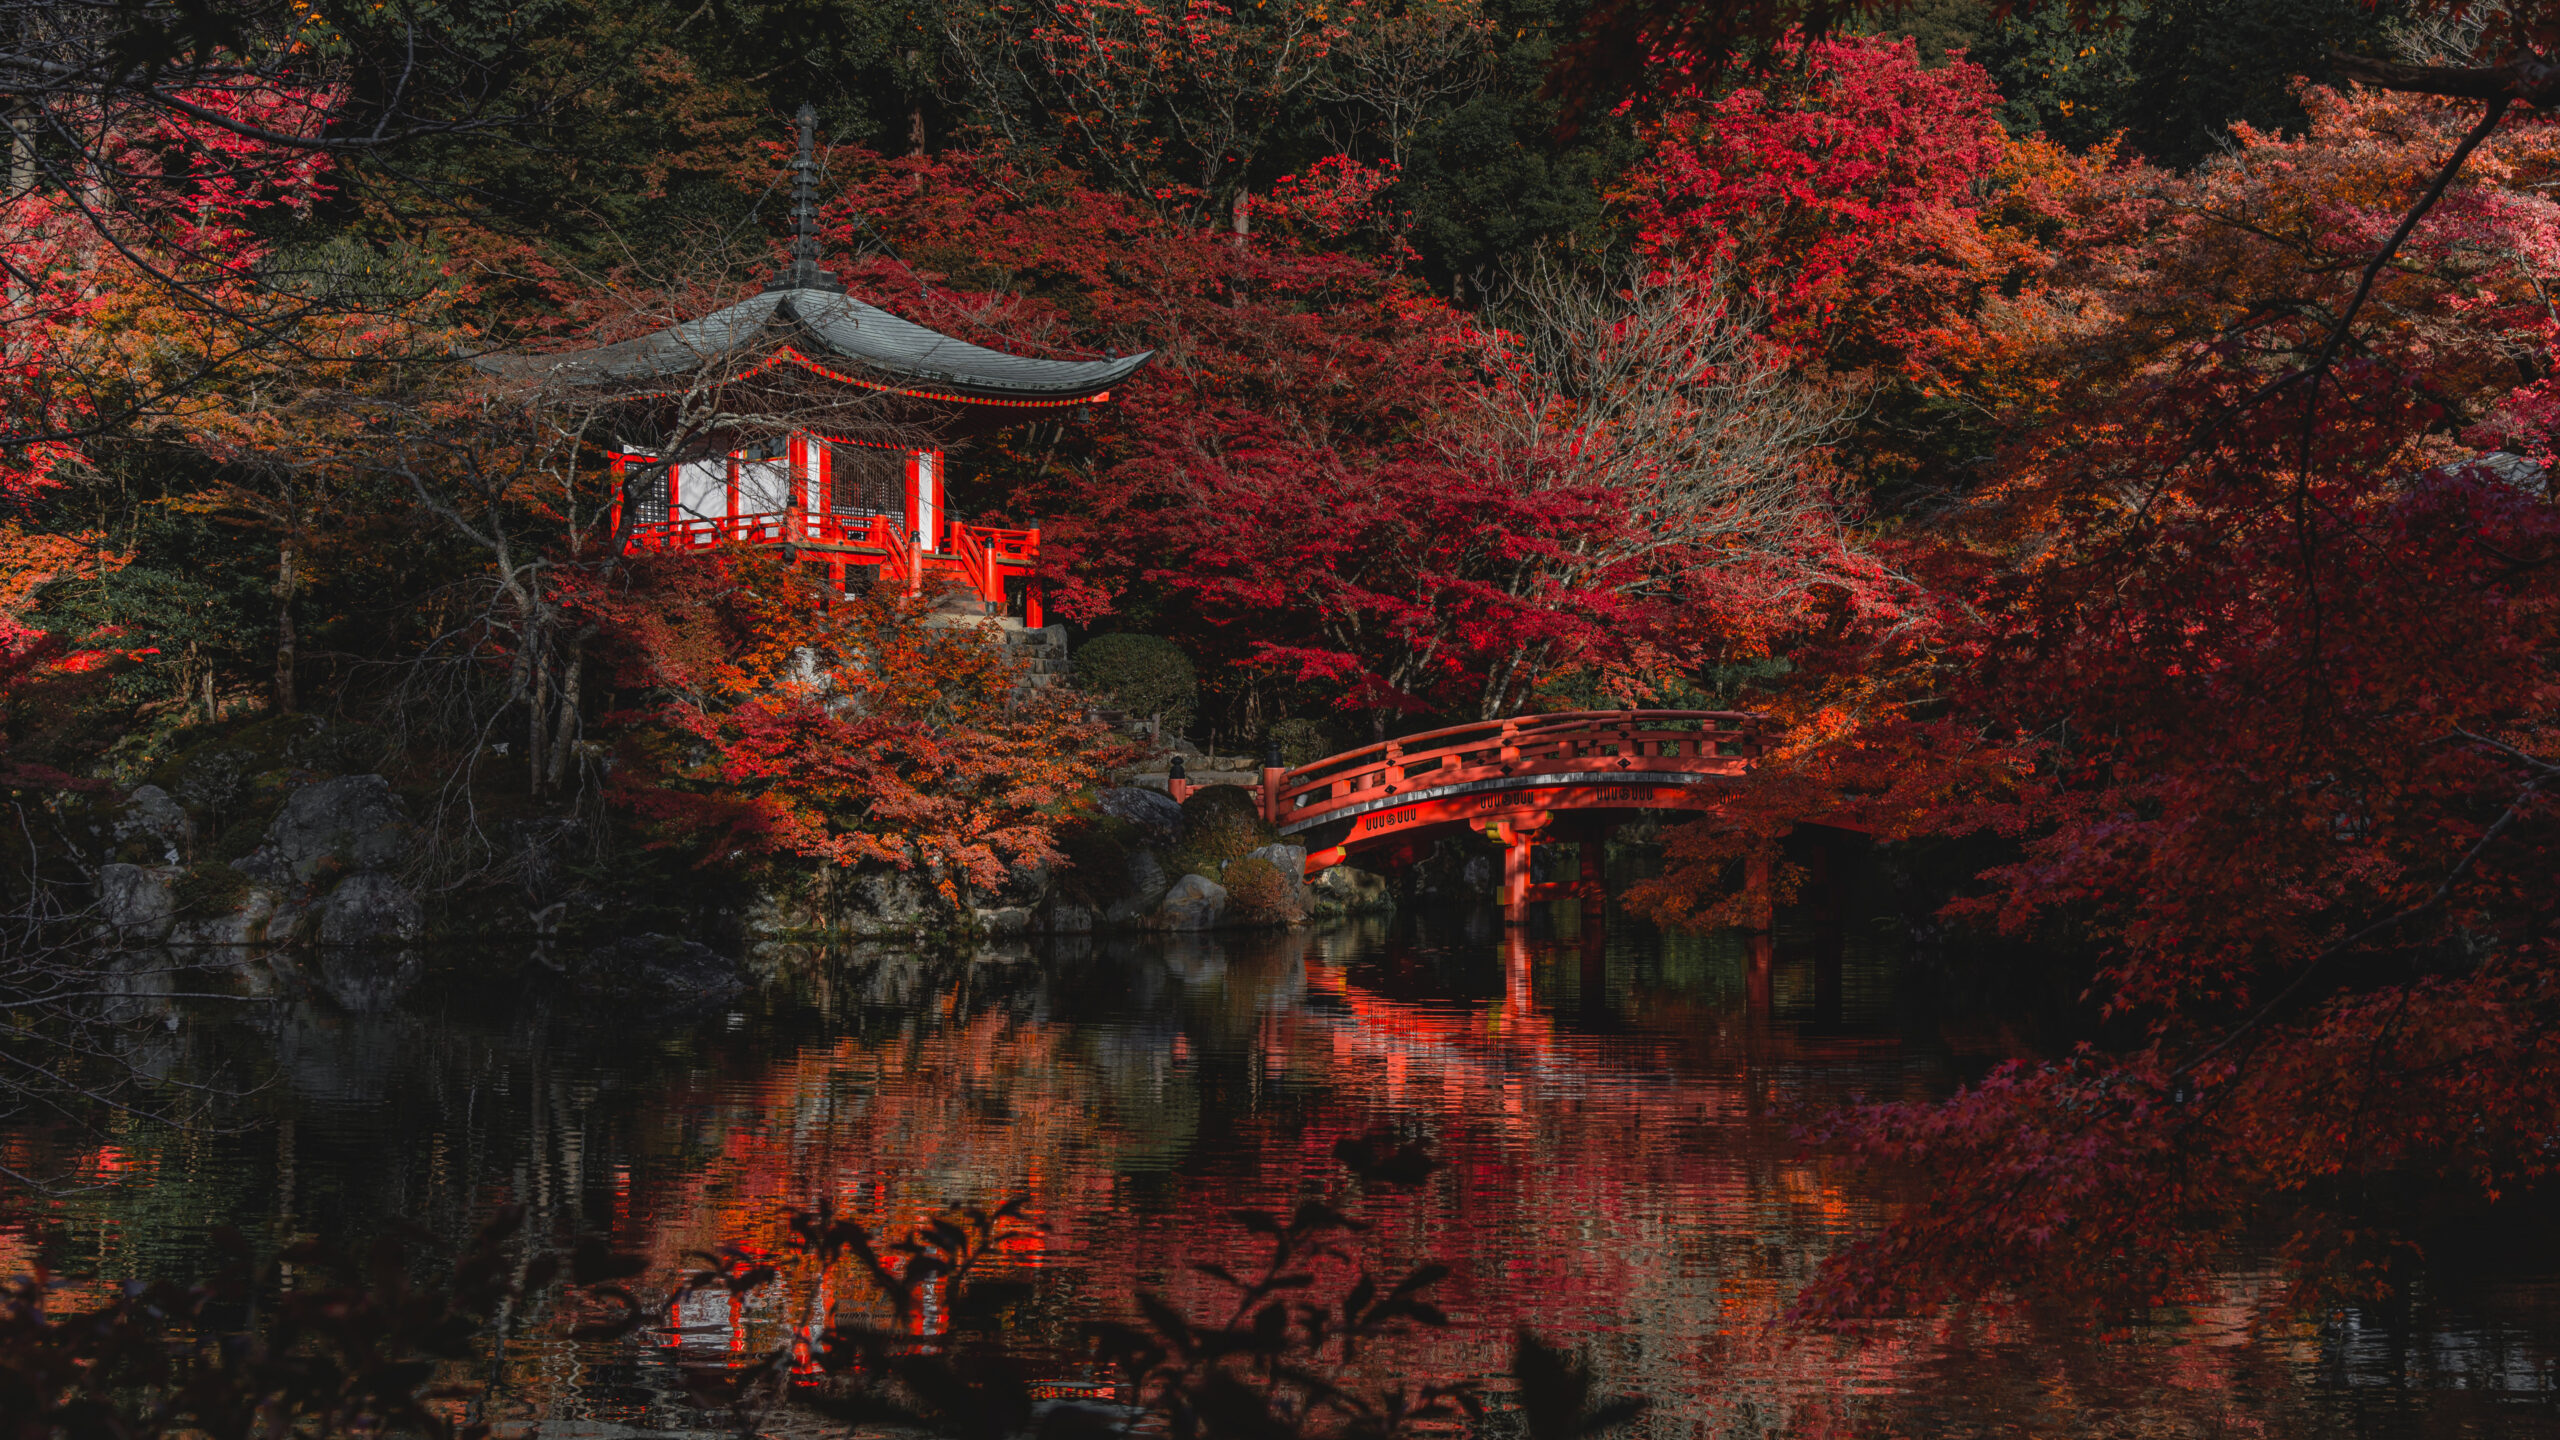 Landscape View Of Pagoda Yellow Red Green Autumn Fall Leaves Trees Park Bridge Reflection On Pond K K HD Nature